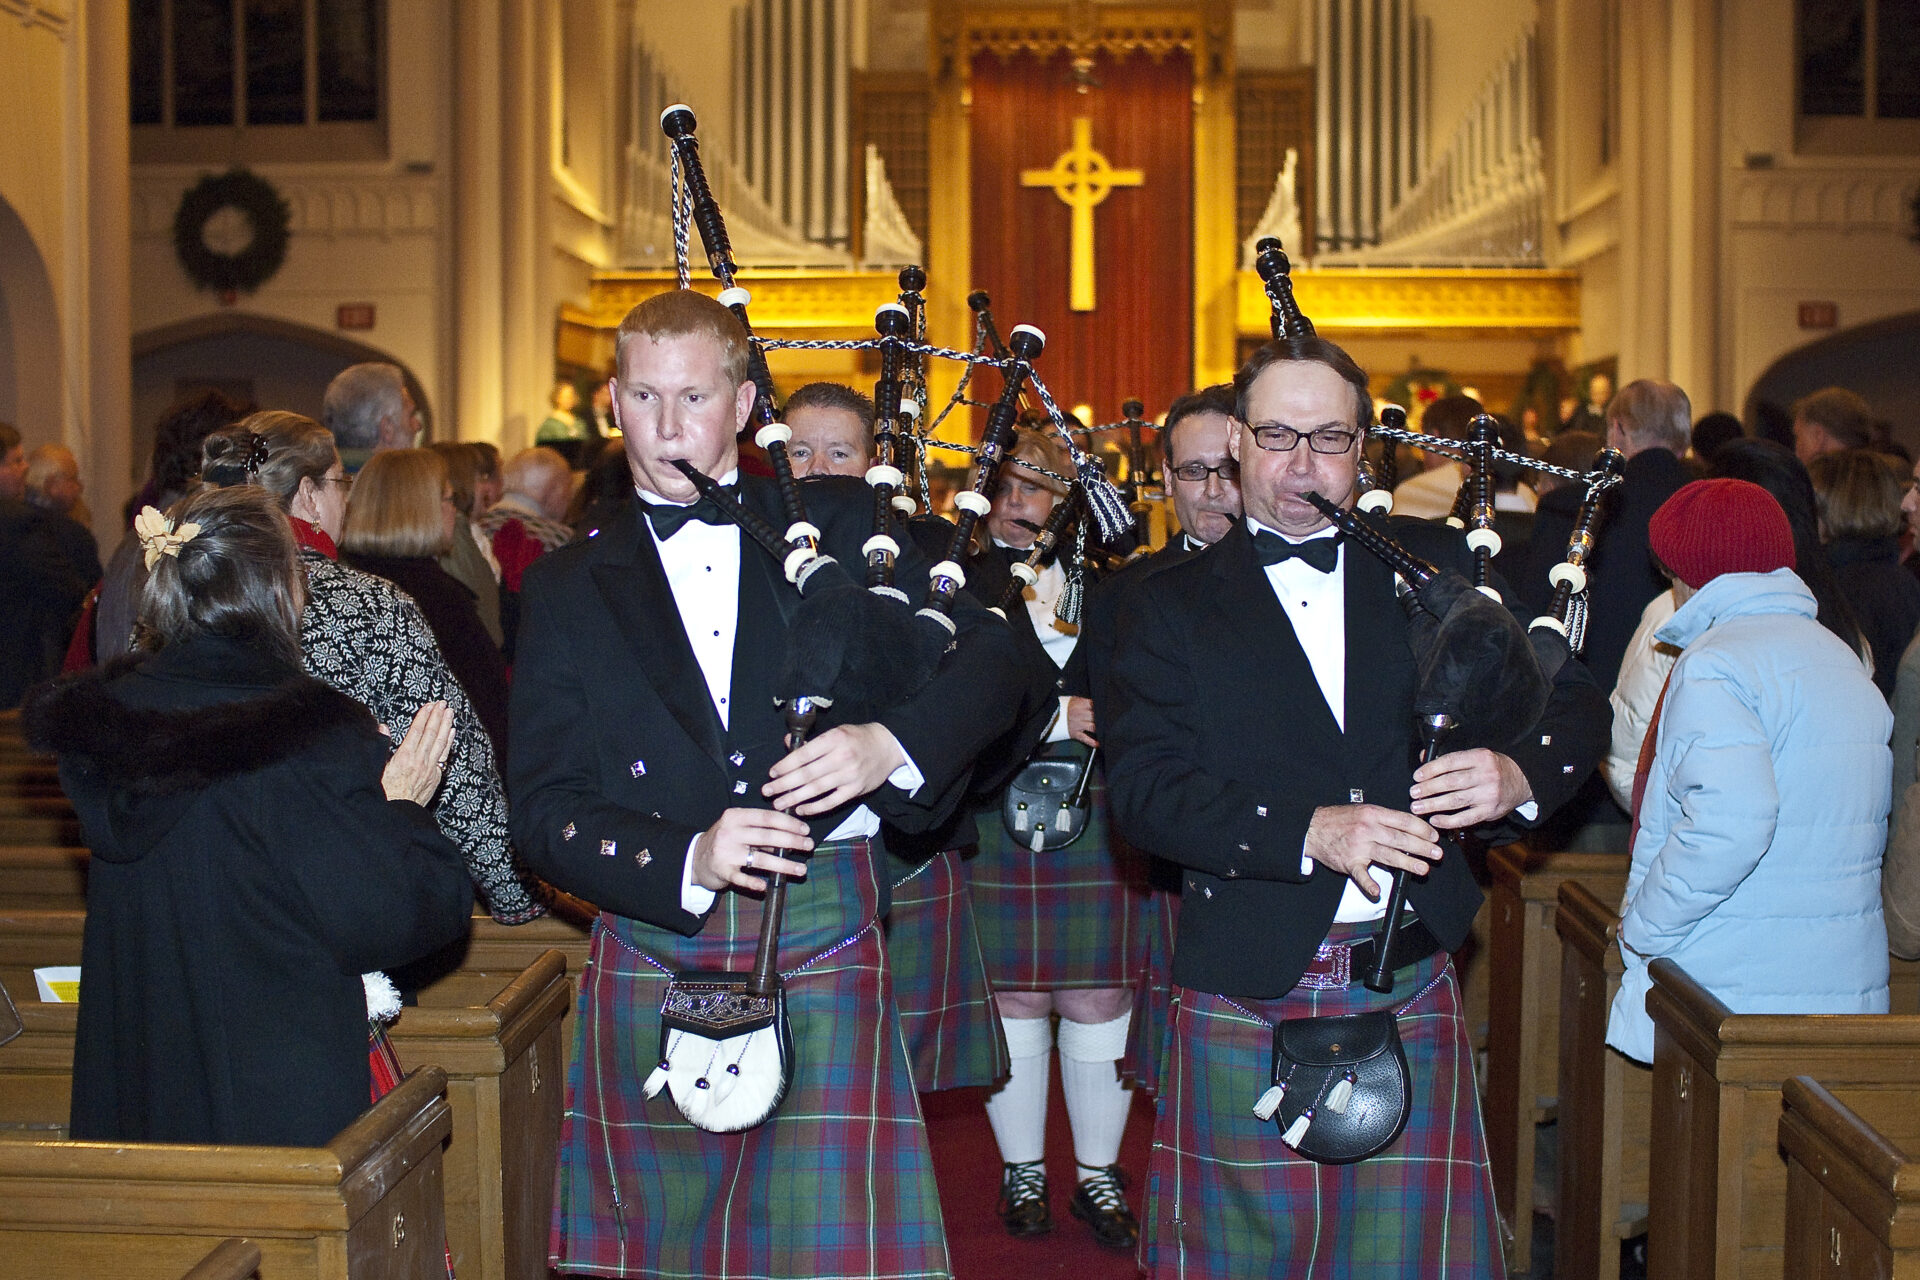 Nov. 13, 2016 – Pipes of Christmas annual concerts return for 18th season in New York and New Jersey on December 17 and 18